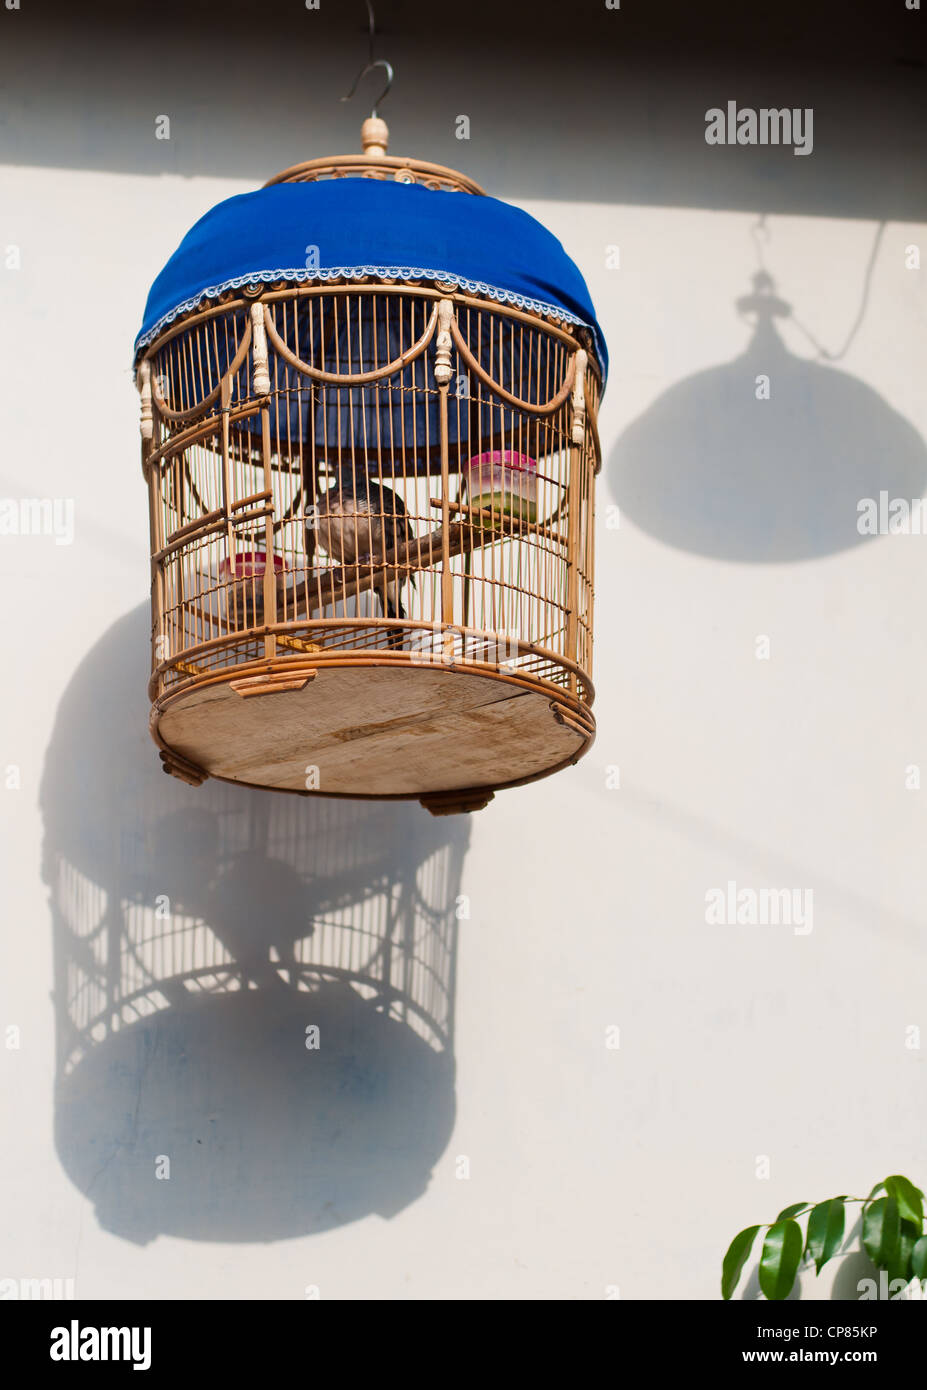 Brass Birdcage Hanging On String Over Stock Photo 12114193